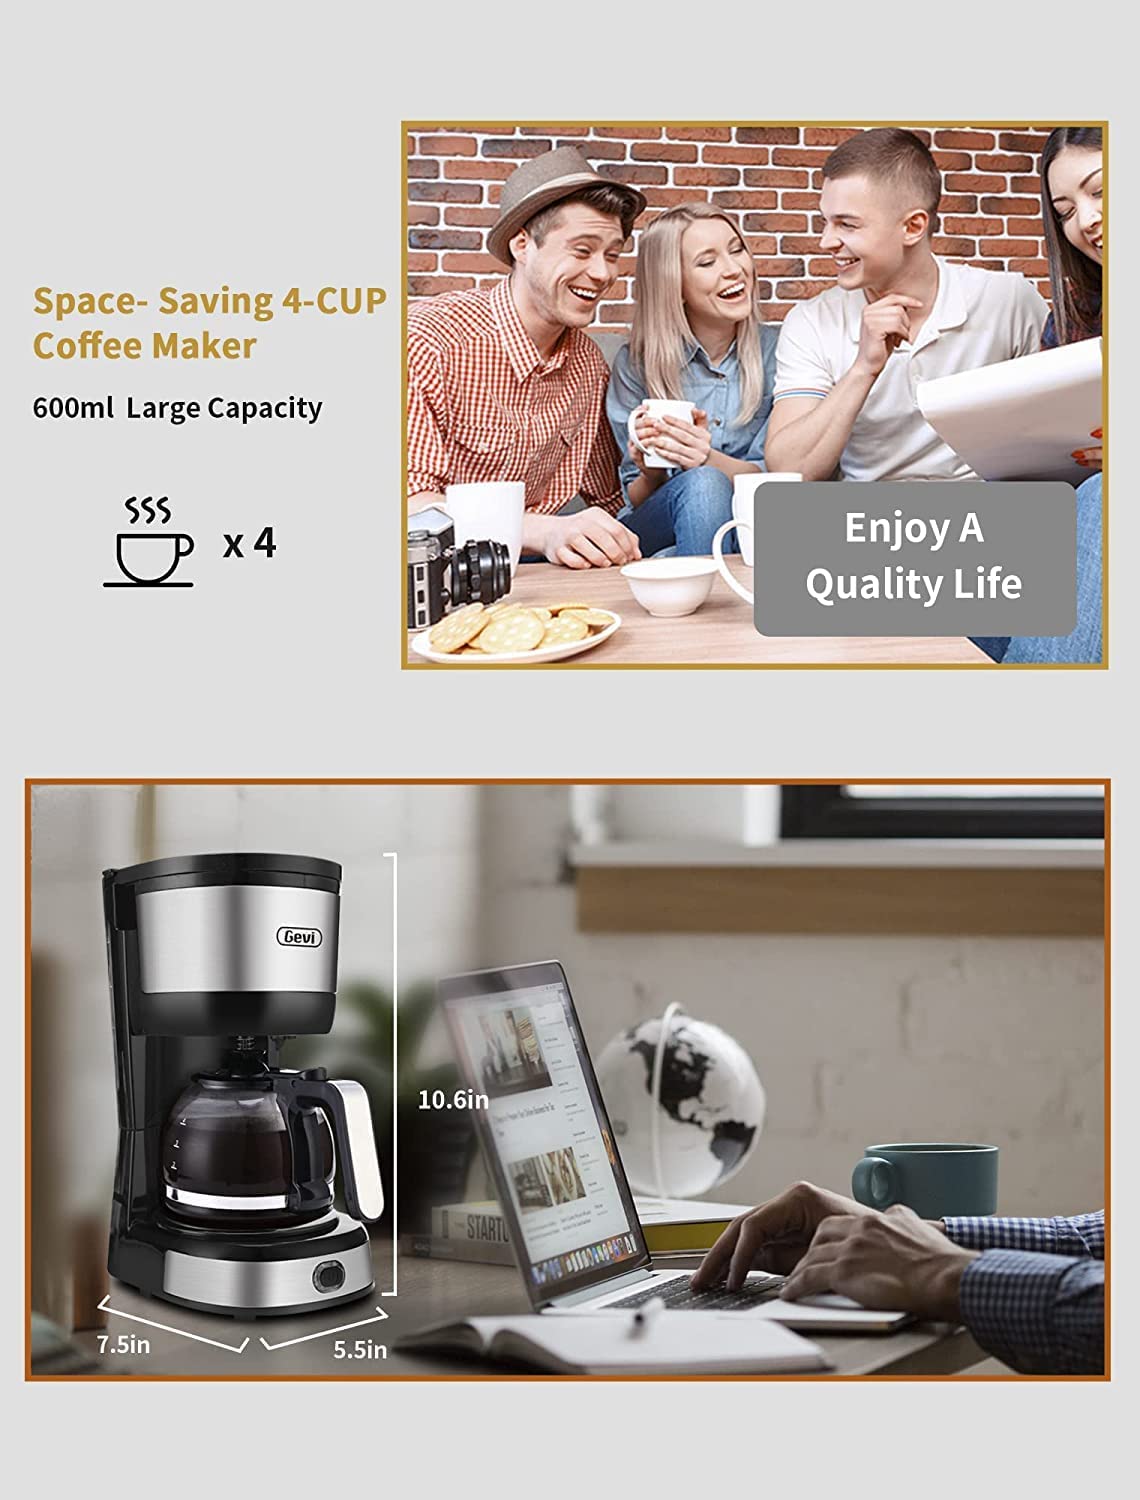 Gevi 4-Cup Coffee Maker with Auto-Shut Off and Cone Filter